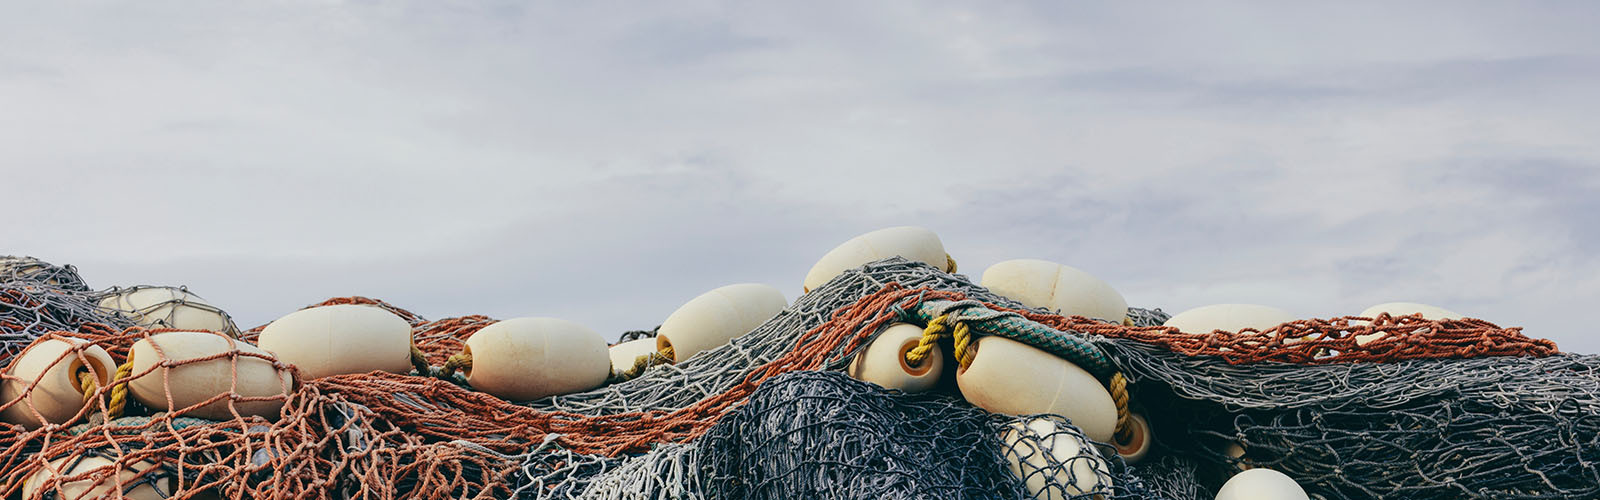 commercial-fishing-nets